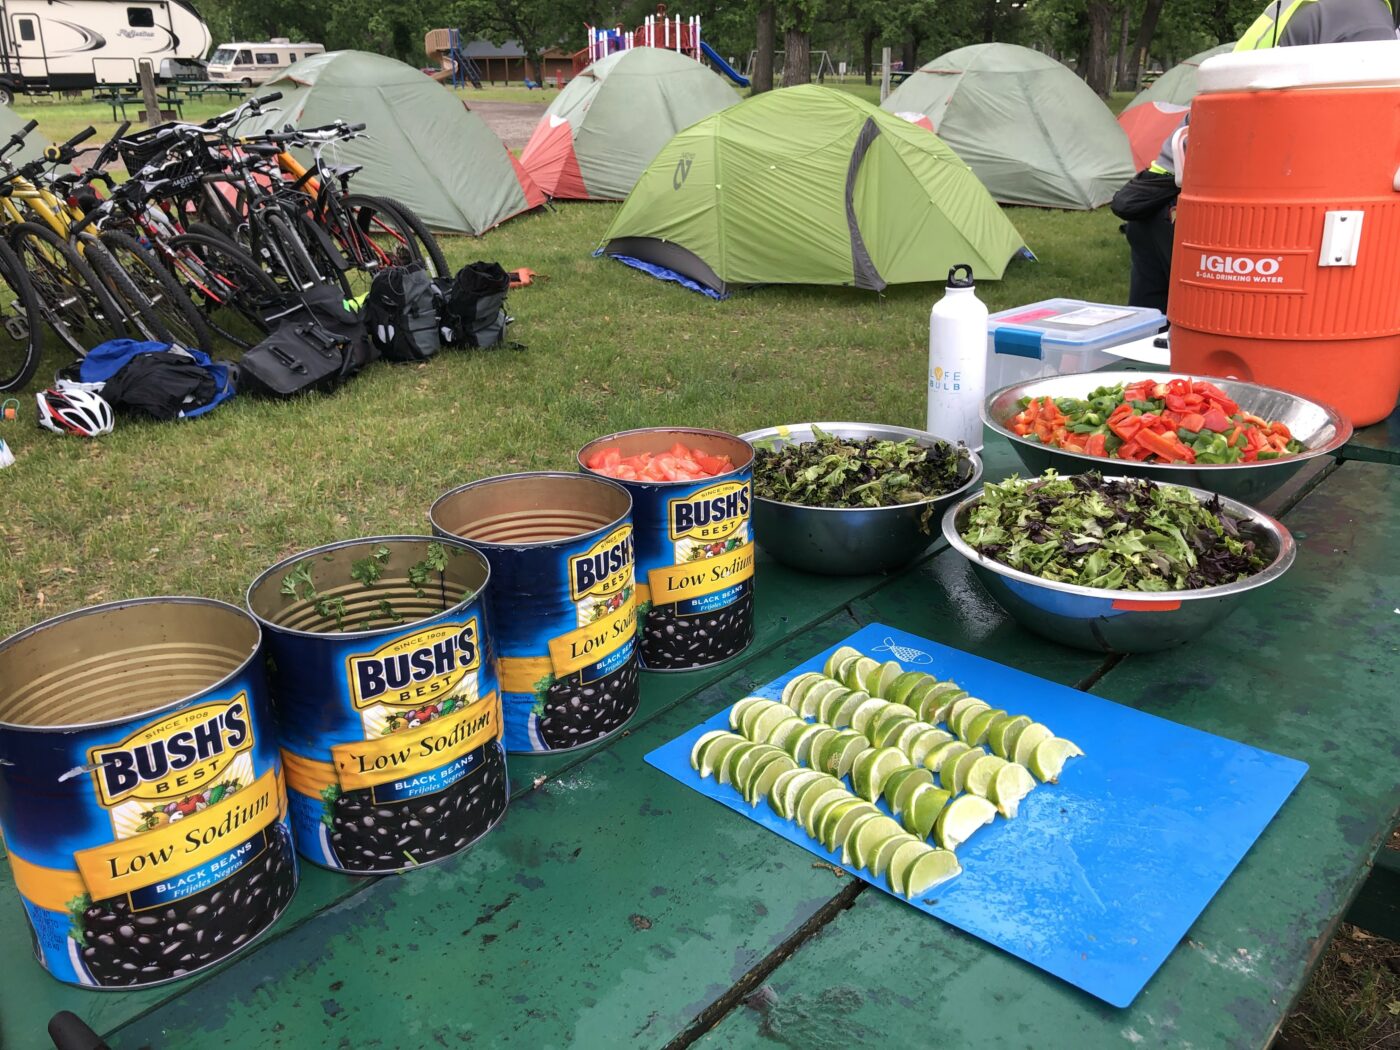 Food set out on a picnic table in front of a line of bicycles and a handful of tents